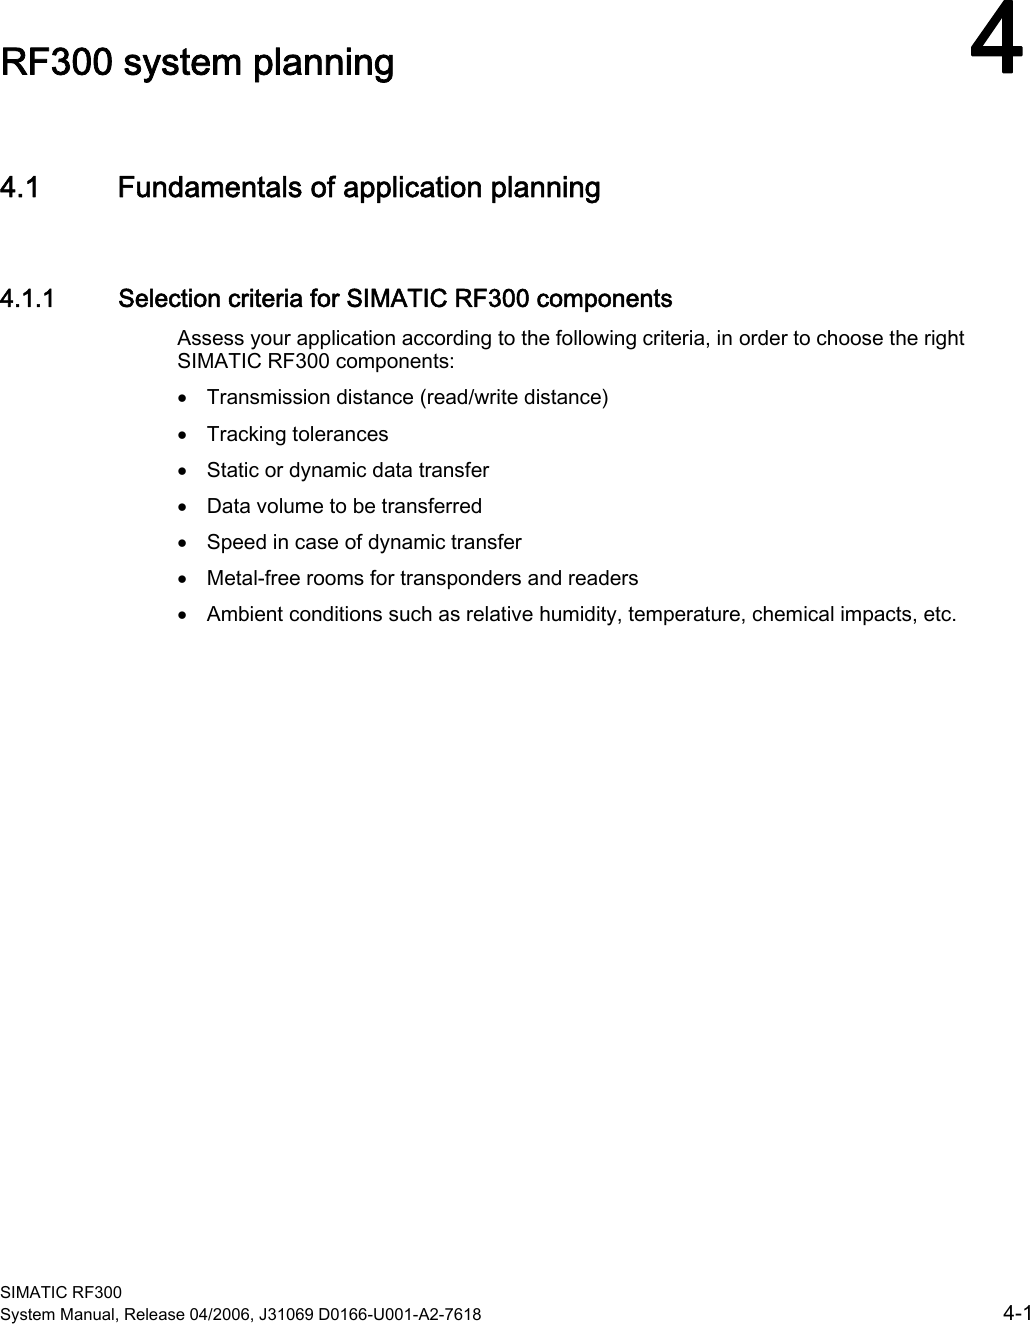  SIMATIC RF300 System Manual, Release 04/2006, J31069 D0166-U001-A2-7618  4-1 RF300 system planning  44.1 4.1 Fundamentals of application planning 4.1.1  Selection criteria for SIMATIC RF300 components Assess your application according to the following criteria, in order to choose the right SIMATIC RF300 components:  • Transmission distance (read/write distance) • Tracking tolerances • Static or dynamic data transfer • Data volume to be transferred • Speed in case of dynamic transfer • Metal-free rooms for transponders and readers • Ambient conditions such as relative humidity, temperature, chemical impacts, etc. 